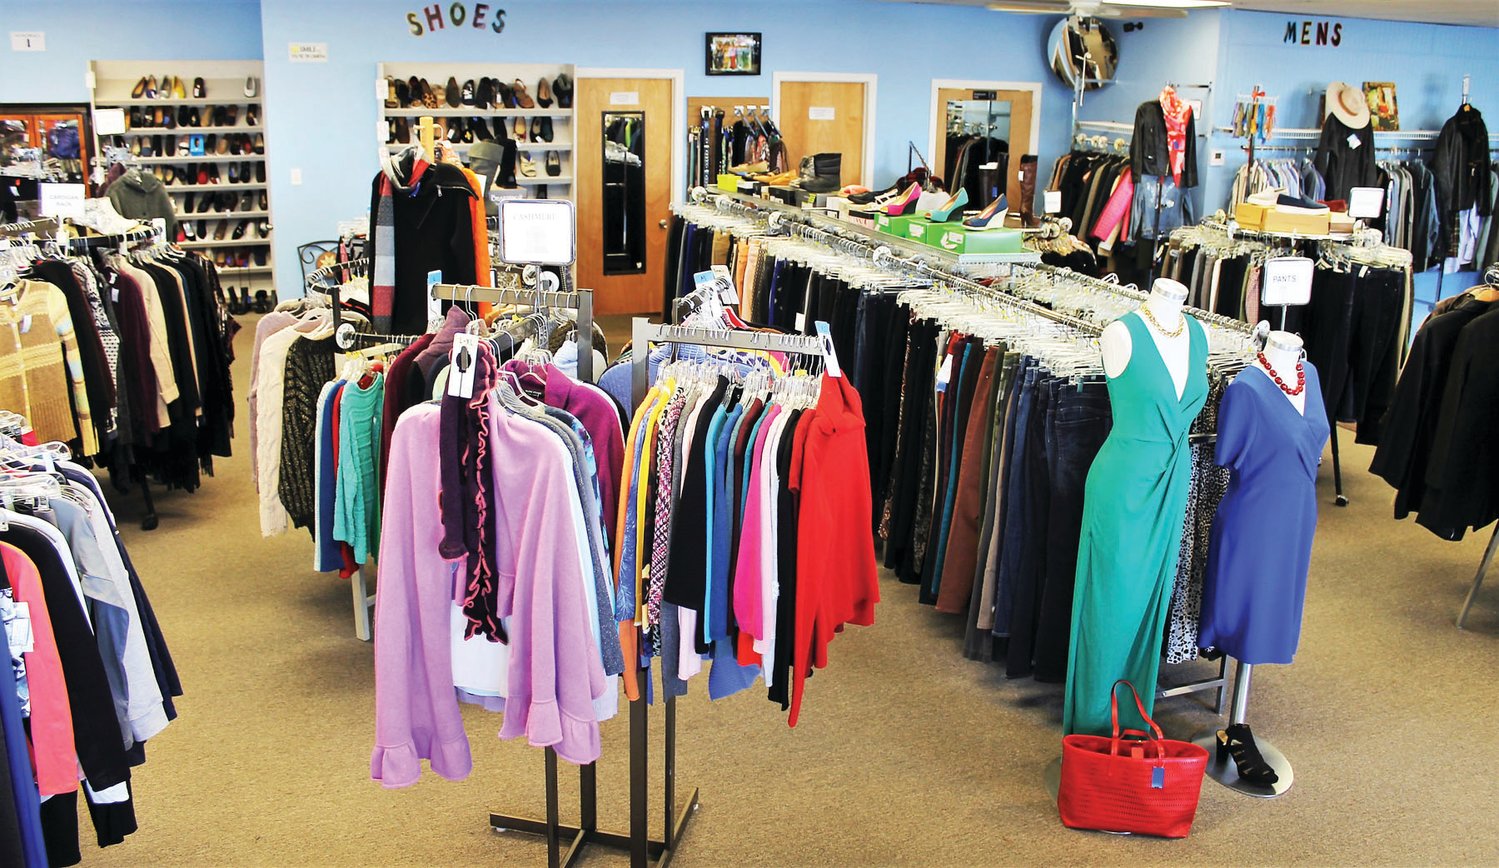 The Boutique On Main Street, Luxury Consignment Shop